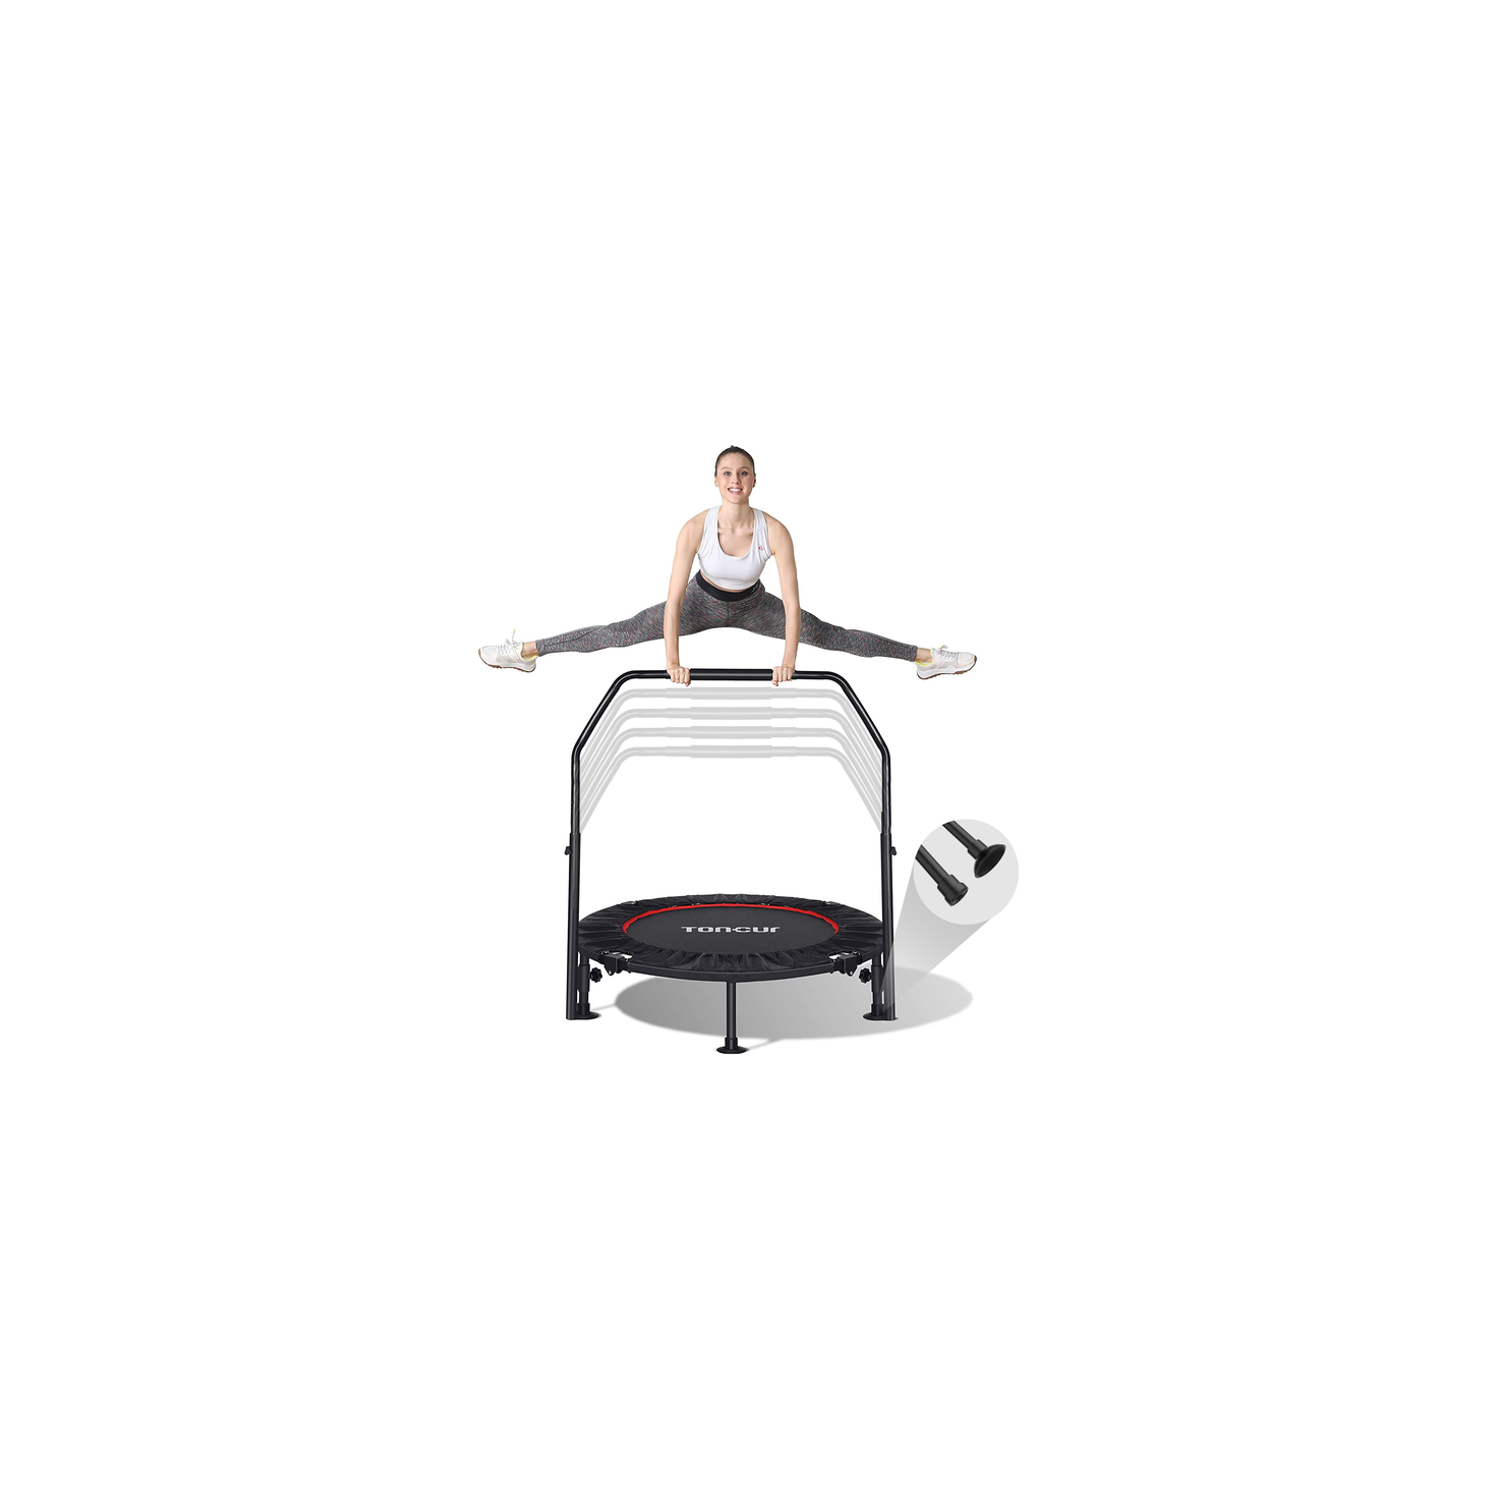 Toncur 40" Fitness Trampoline for Adults, Folding Rebounder Trampoline with Adjustable Handle for Adults & Kids Indoor Outdoor Fitness Training Workout Max Load 330 lbs